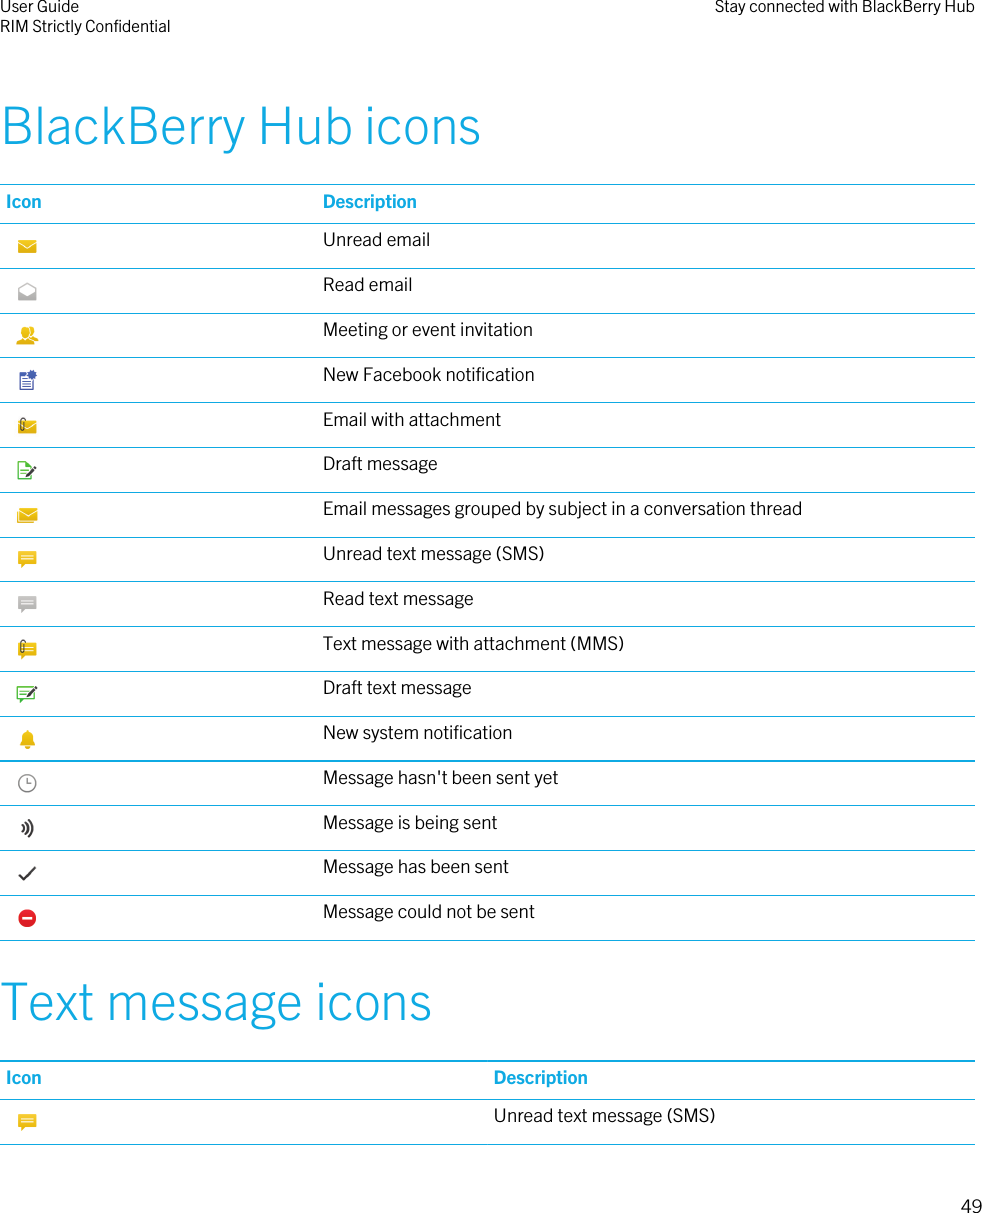 BlackBerry Hub iconsIcon Description Unread email Read email Meeting or event invitation New Facebook notification Email with attachment Draft message Email messages grouped by subject in a conversation thread Unread text message (SMS) Read text message Text message with attachment (MMS) Draft text message New system notification Message hasn&apos;t been sent yet Message is being sent Message has been sent Message could not be sentText message iconsIcon Description Unread text message (SMS)User GuideRIM Strictly Confidential Stay connected with BlackBerry Hub49